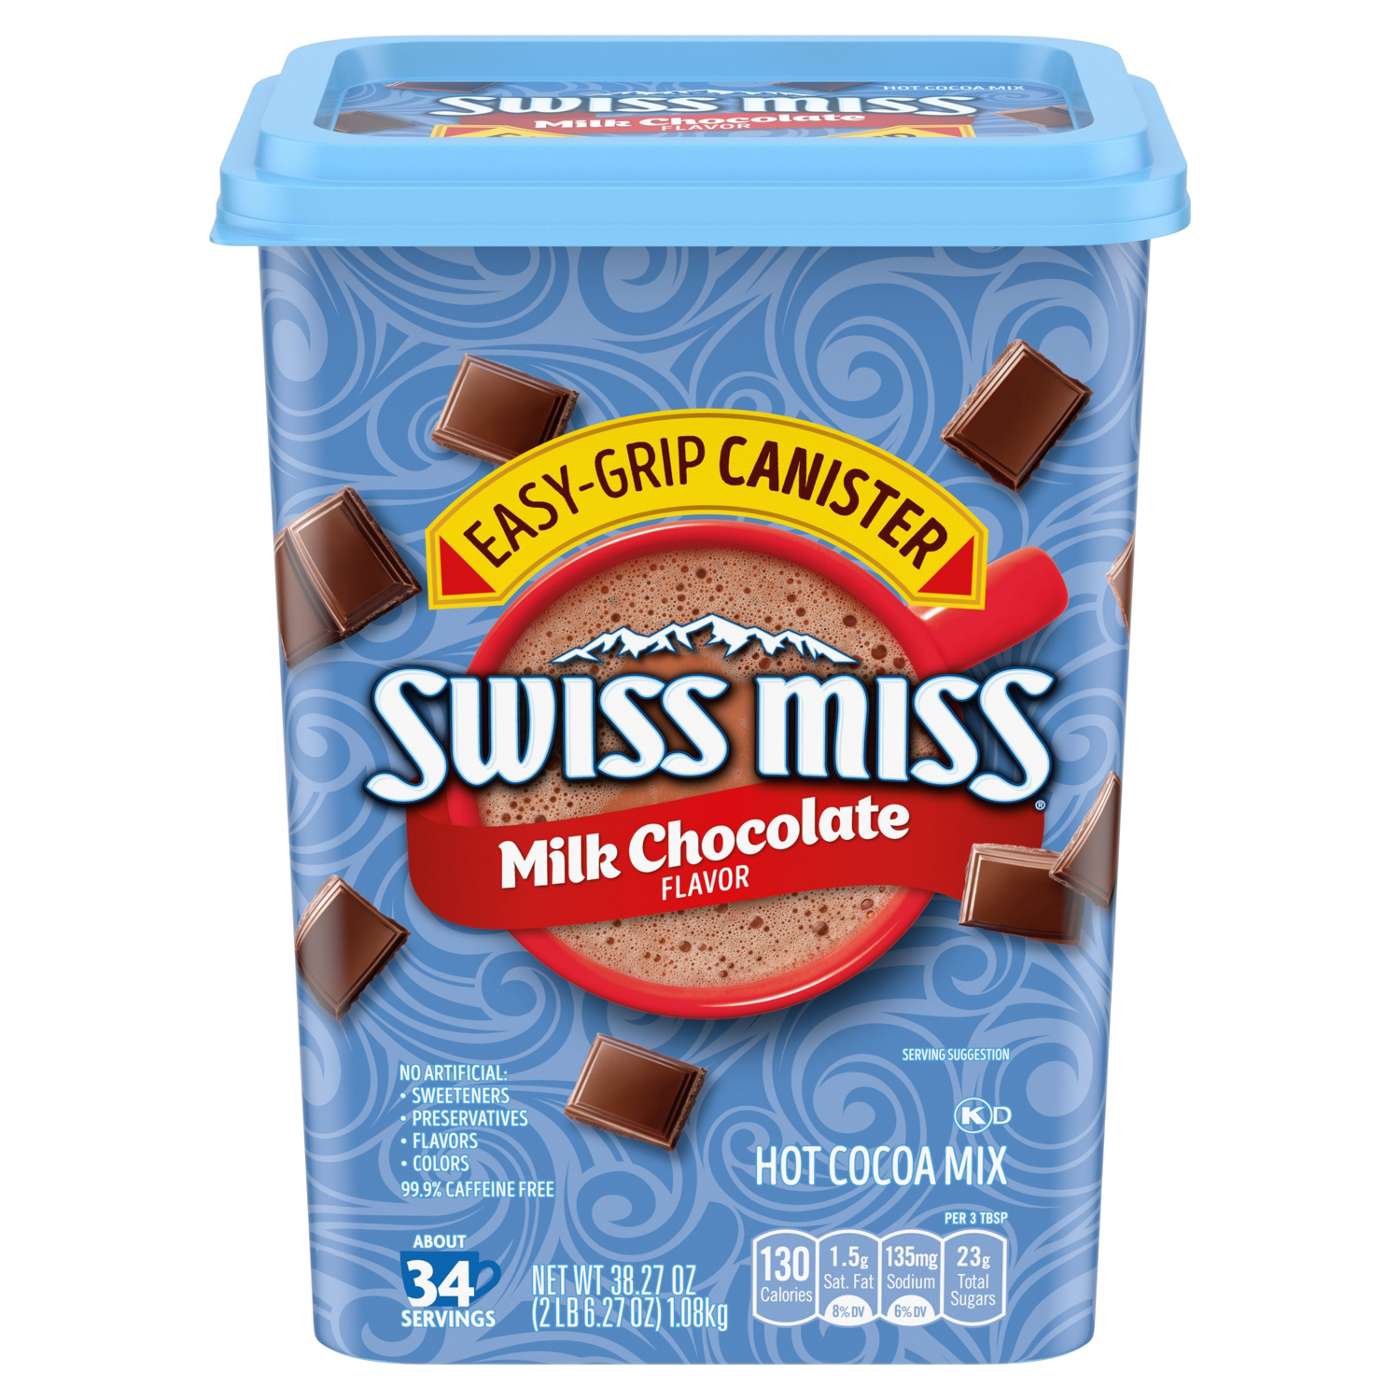 Milk Chocolate with Marshmallows, Easy-Grip Canister